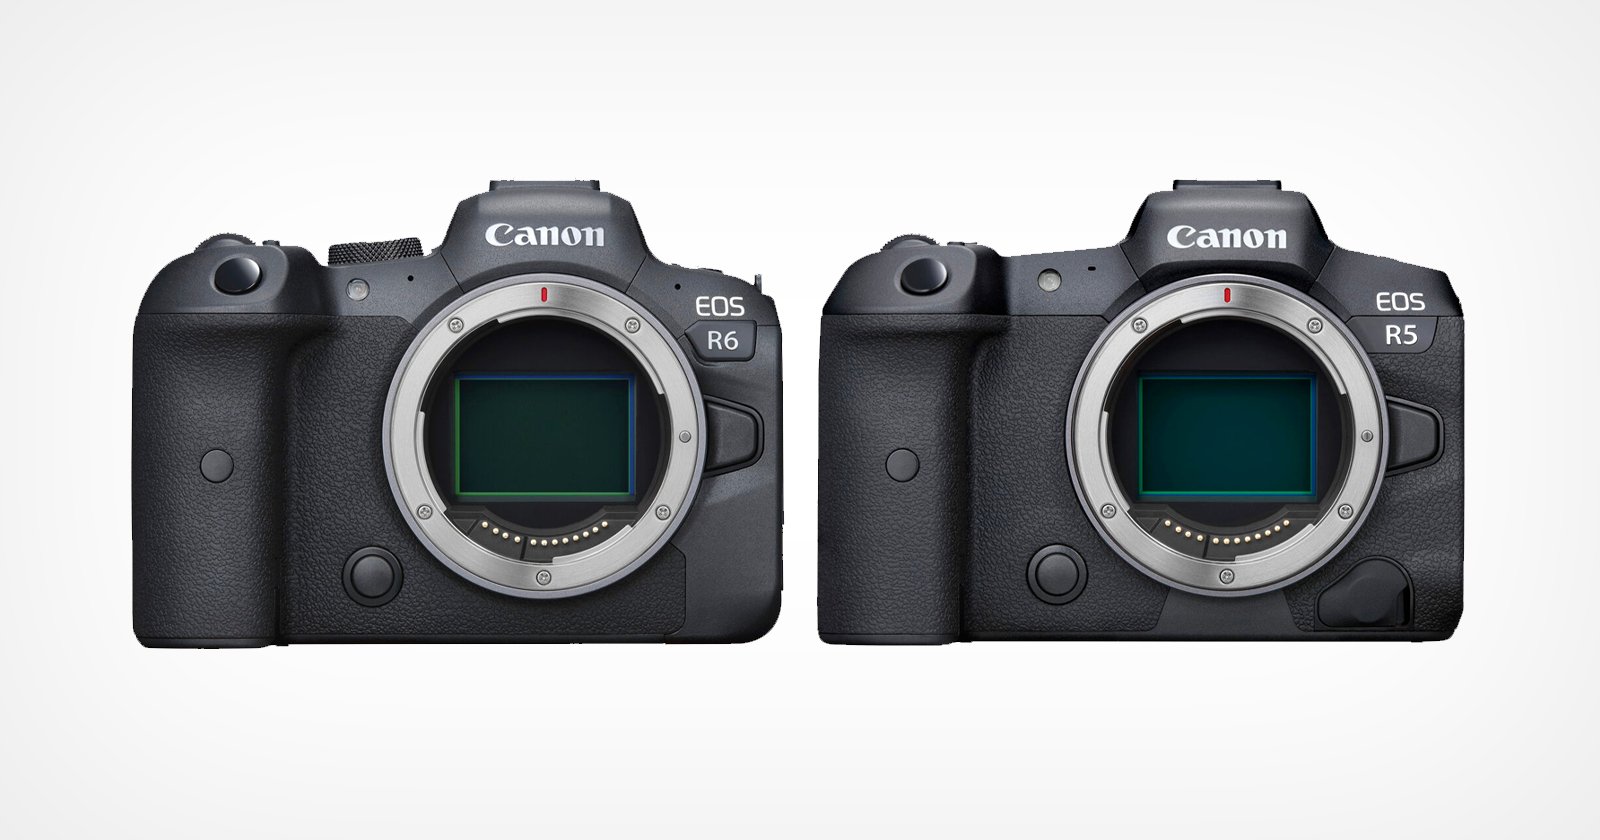 The Canon R5 and R6 side by side on a white background